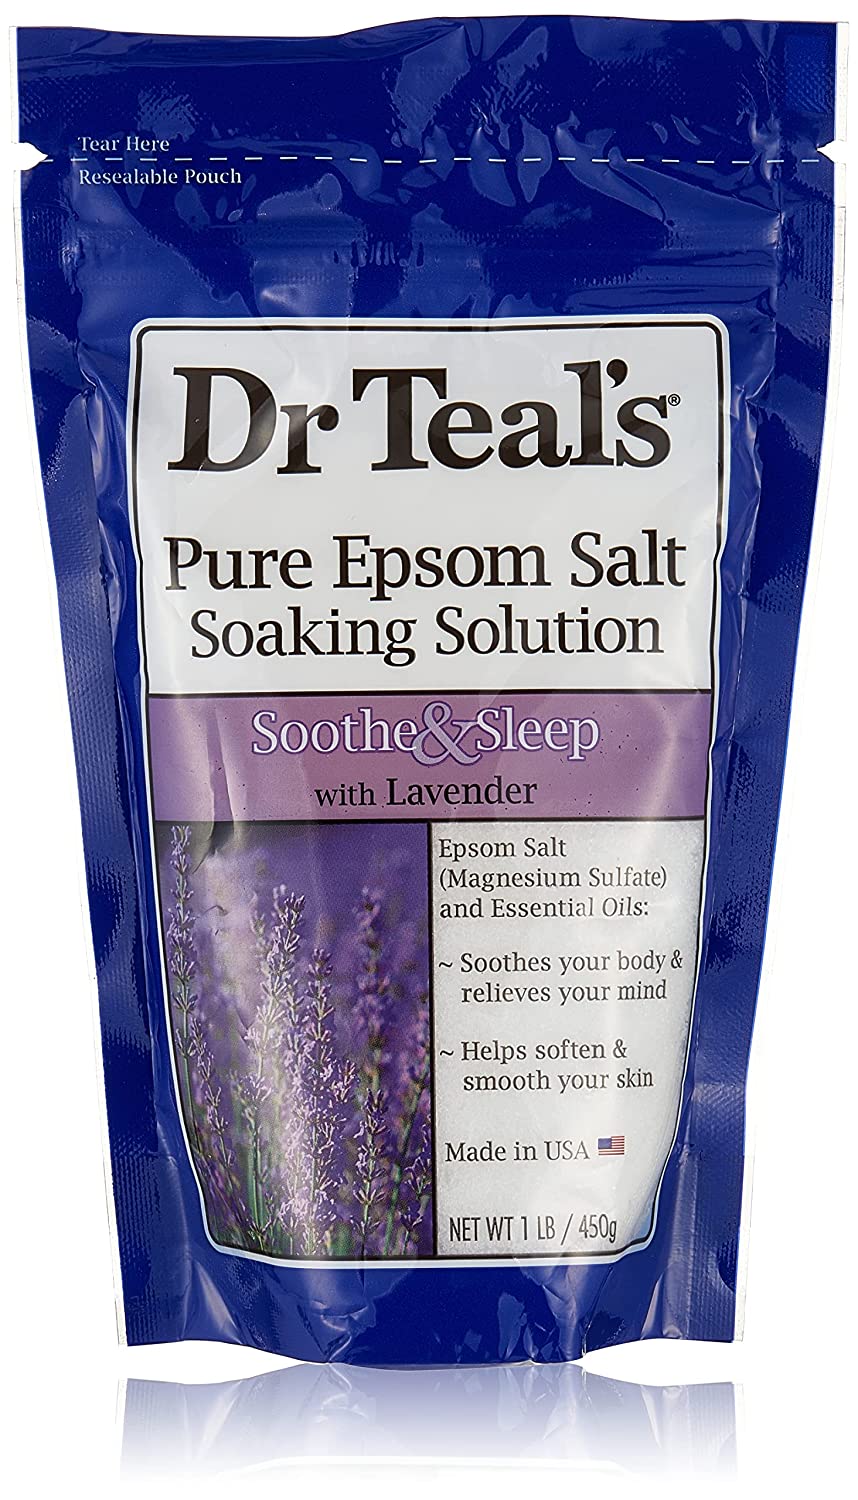 Dr Teal's Pure Epsom Soaking Solution Smooth & Sleep with Lavender Bath Salt (450g) Beautiful